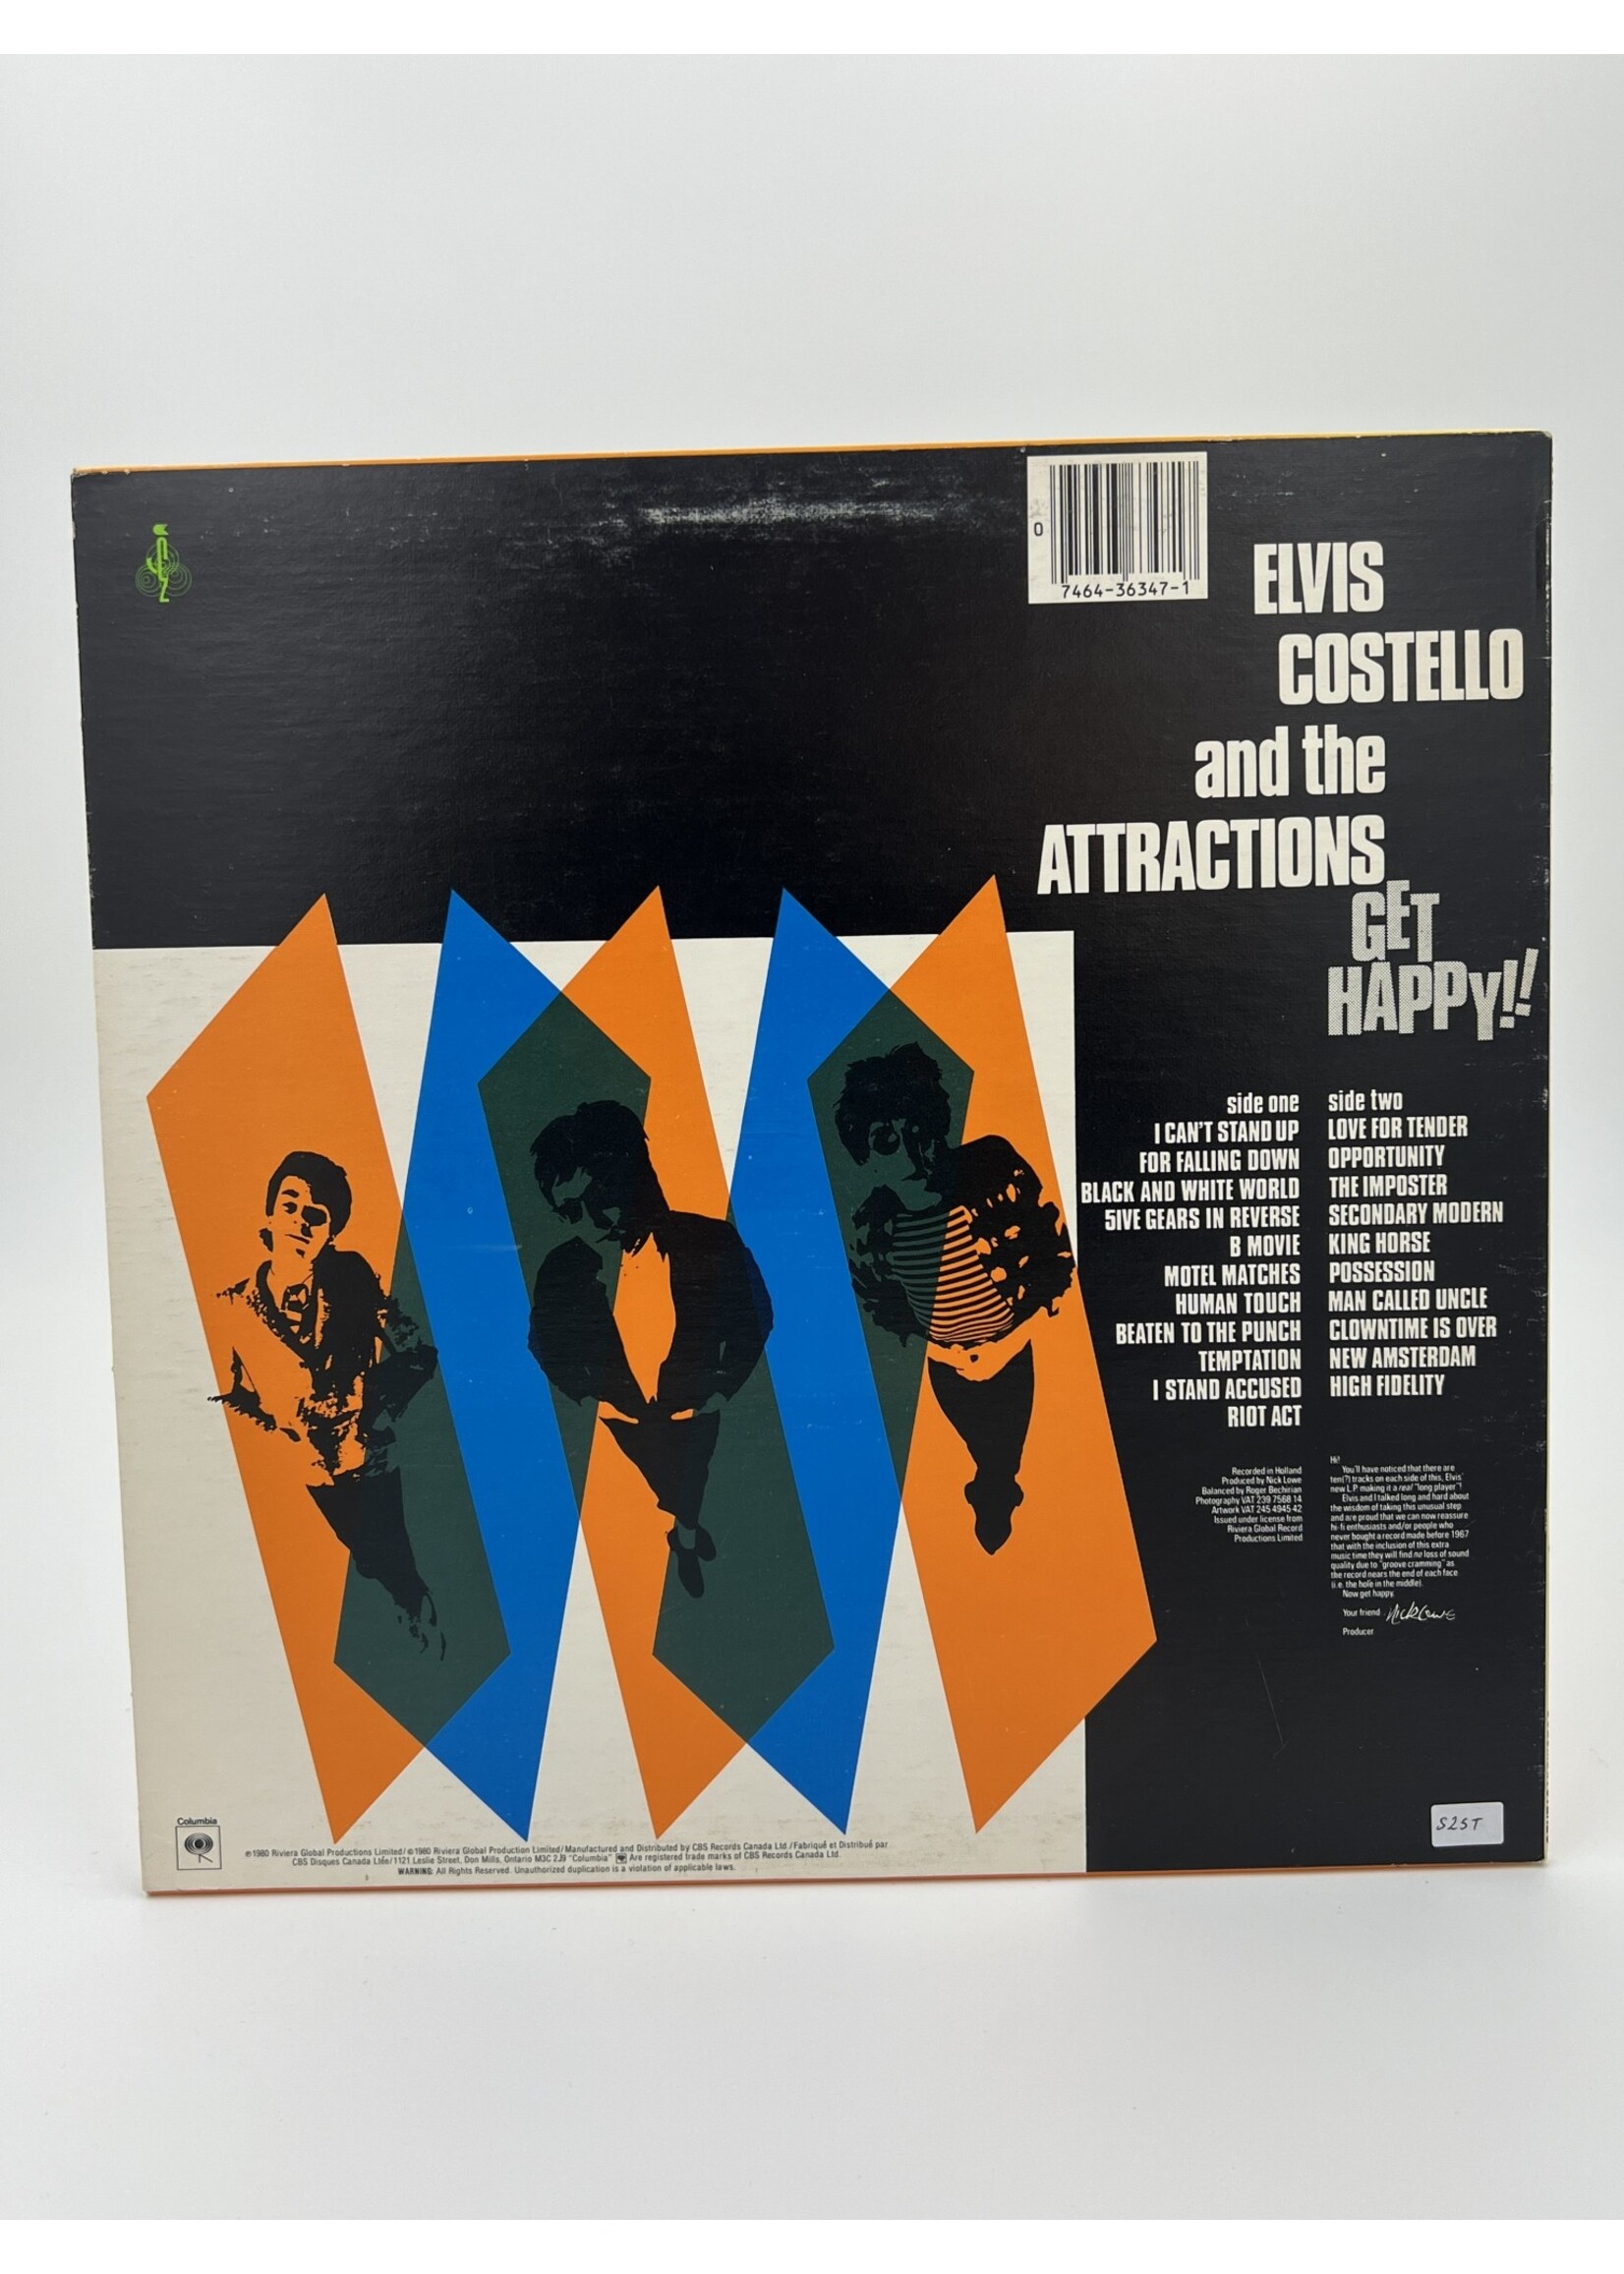 LP   Elvis Costello And The Attractions Get Happy LP Record